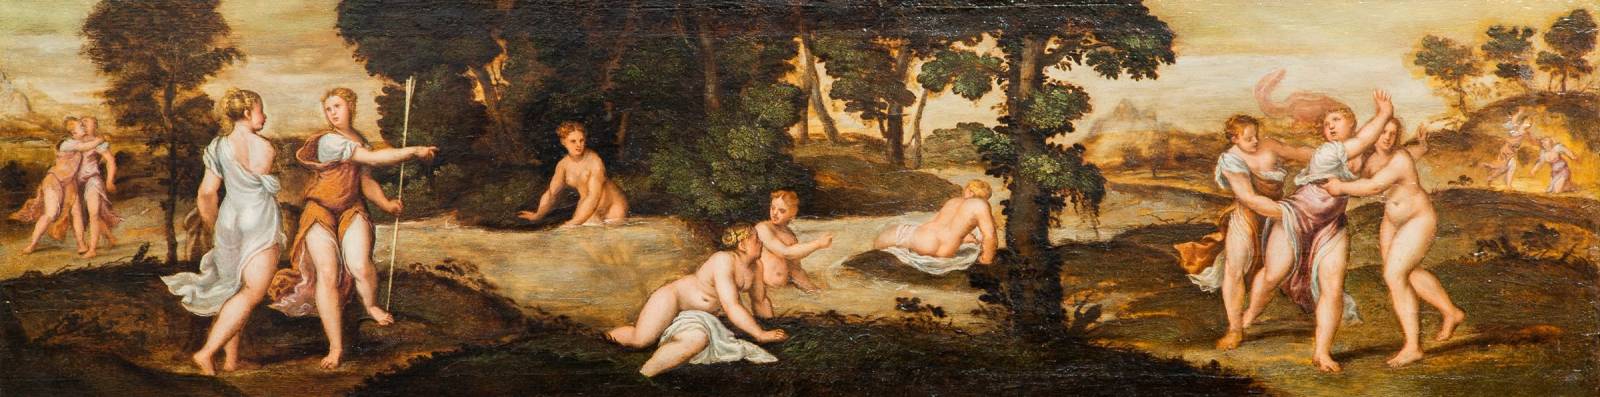 Titian and Others: The Newest Works in the Wawel Royal Castle Collection